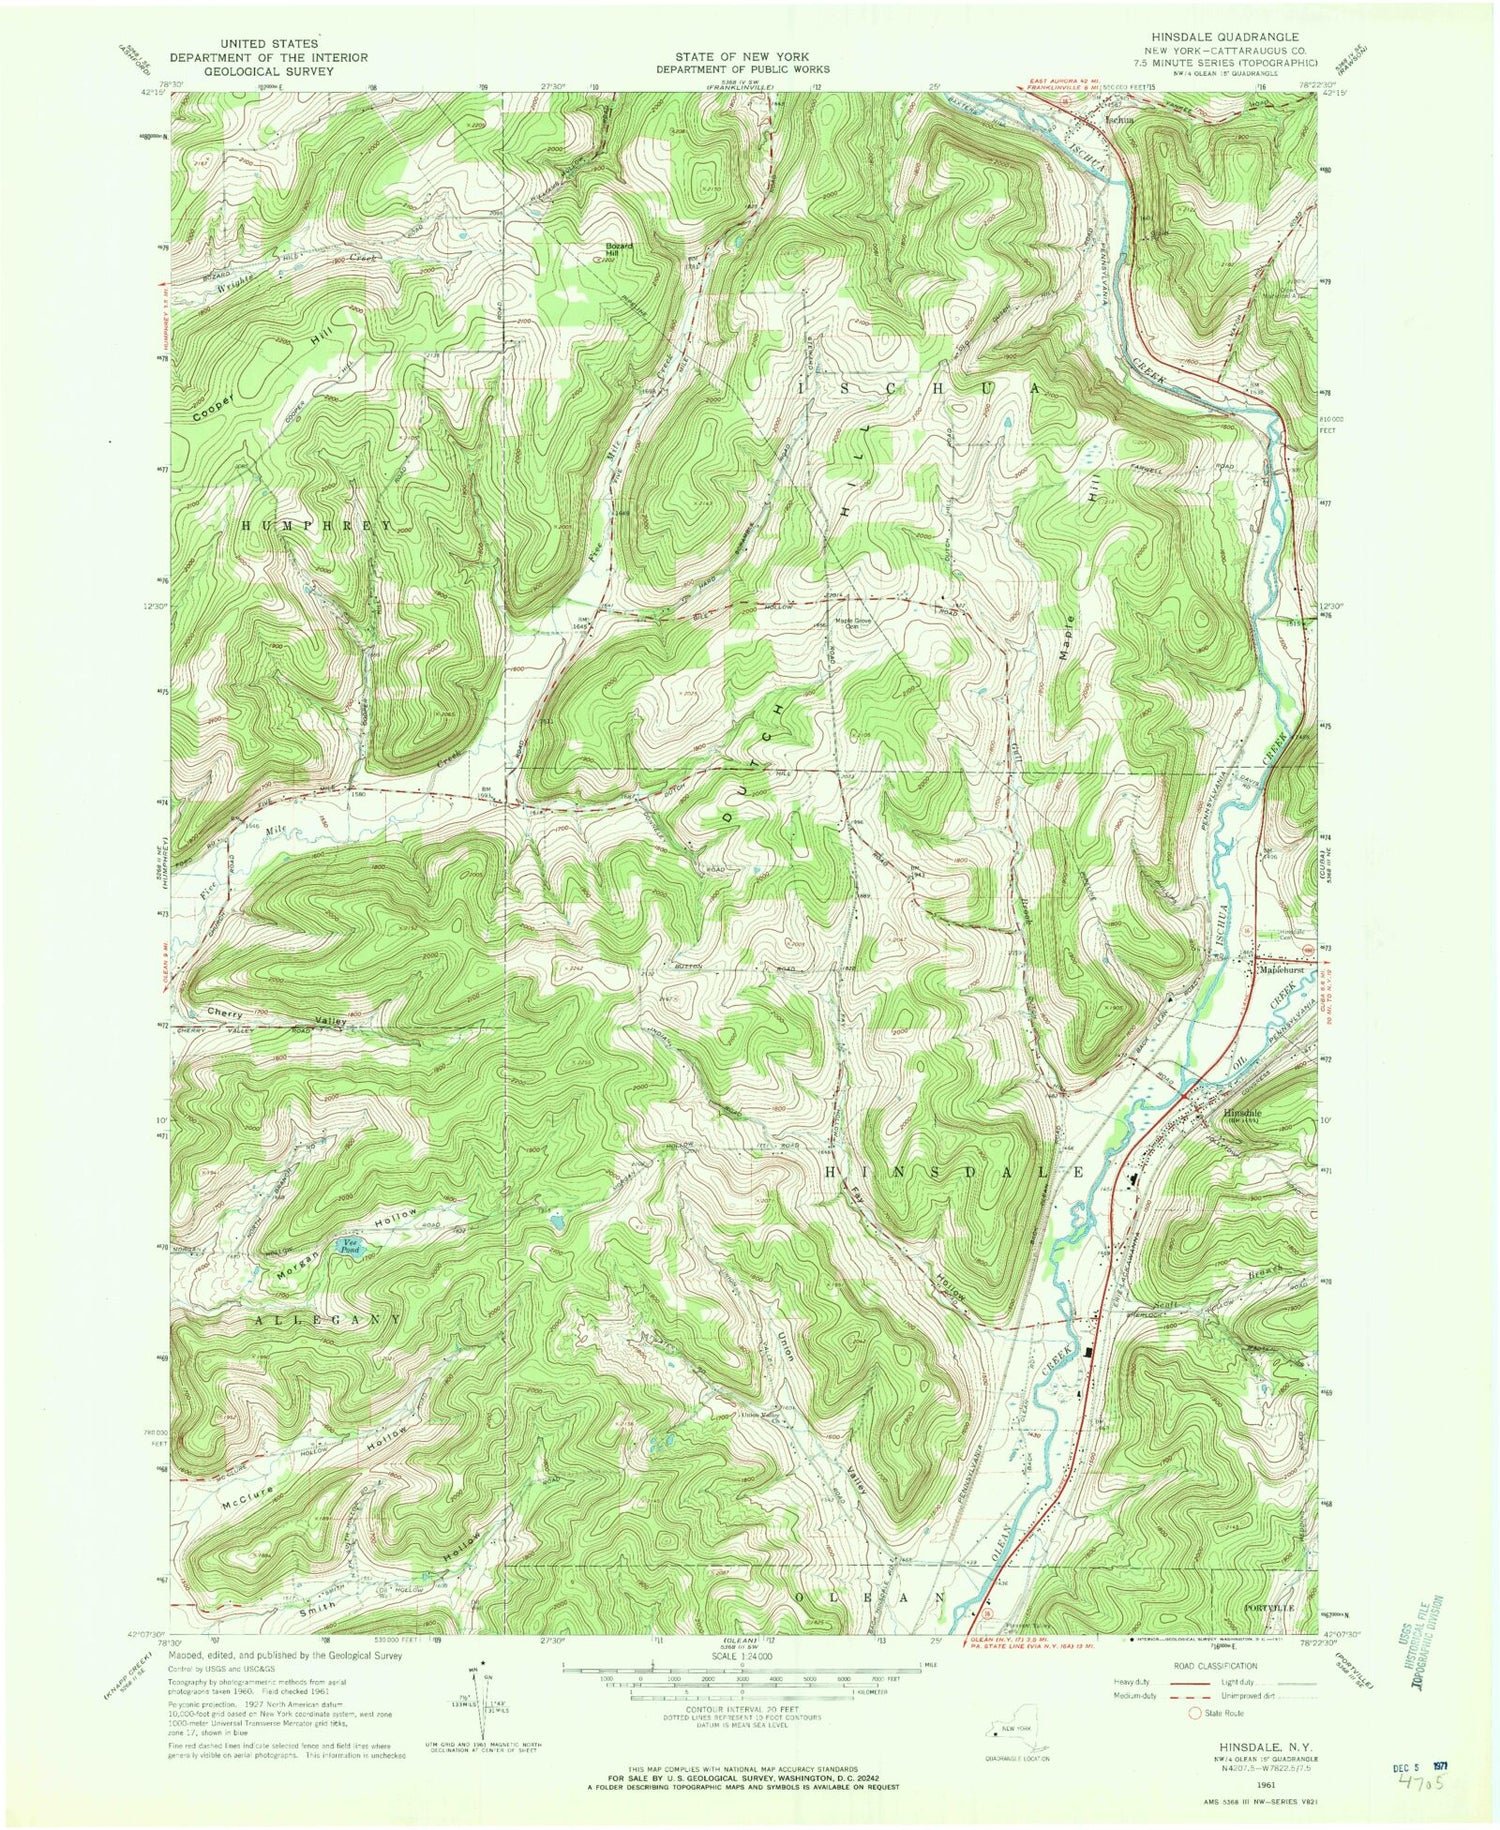 Classic USGS Hinsdale New York 7.5'x7.5' Topo Map Image